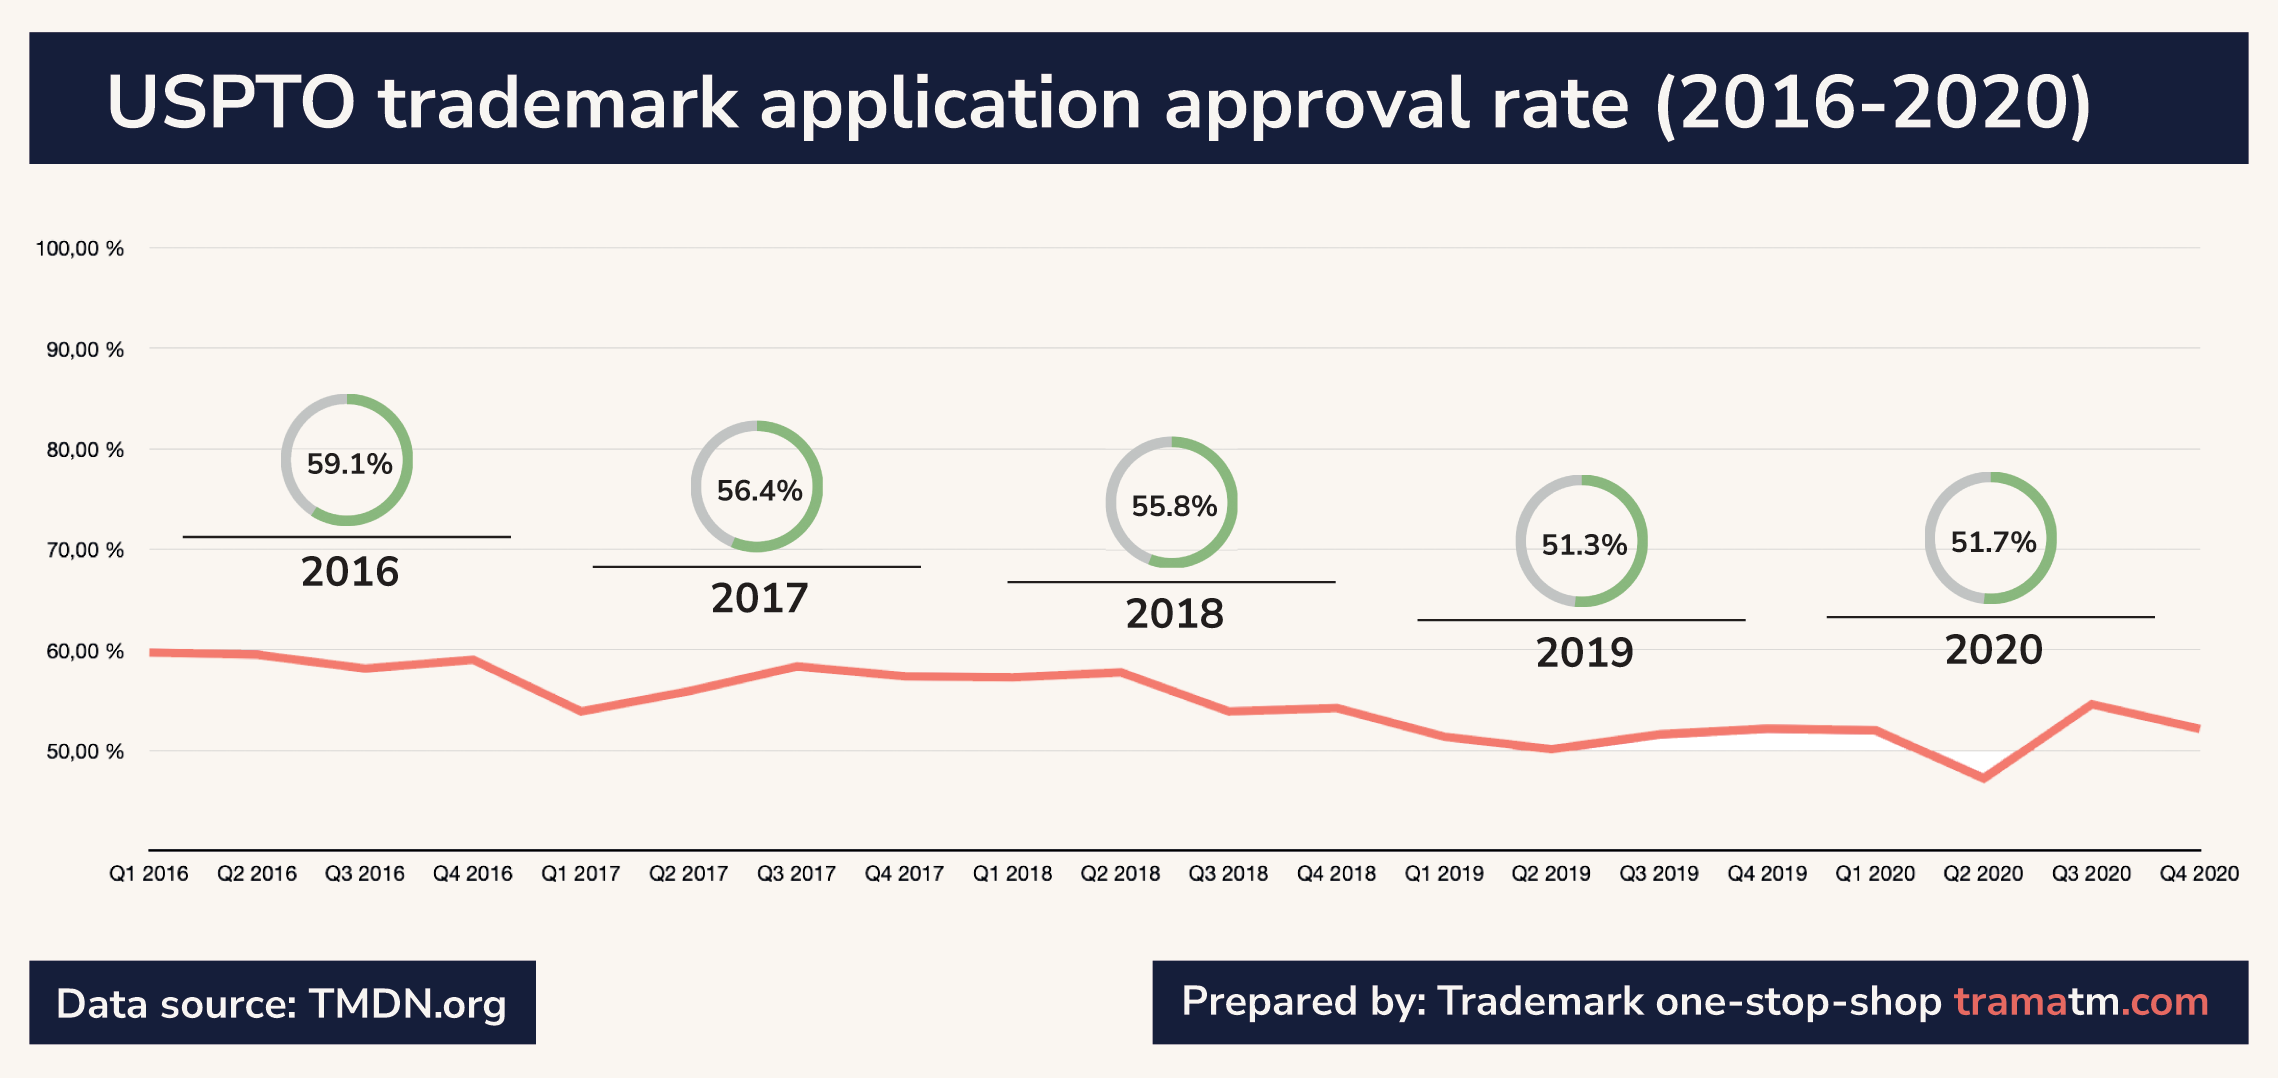 USPTO trademark approval rate